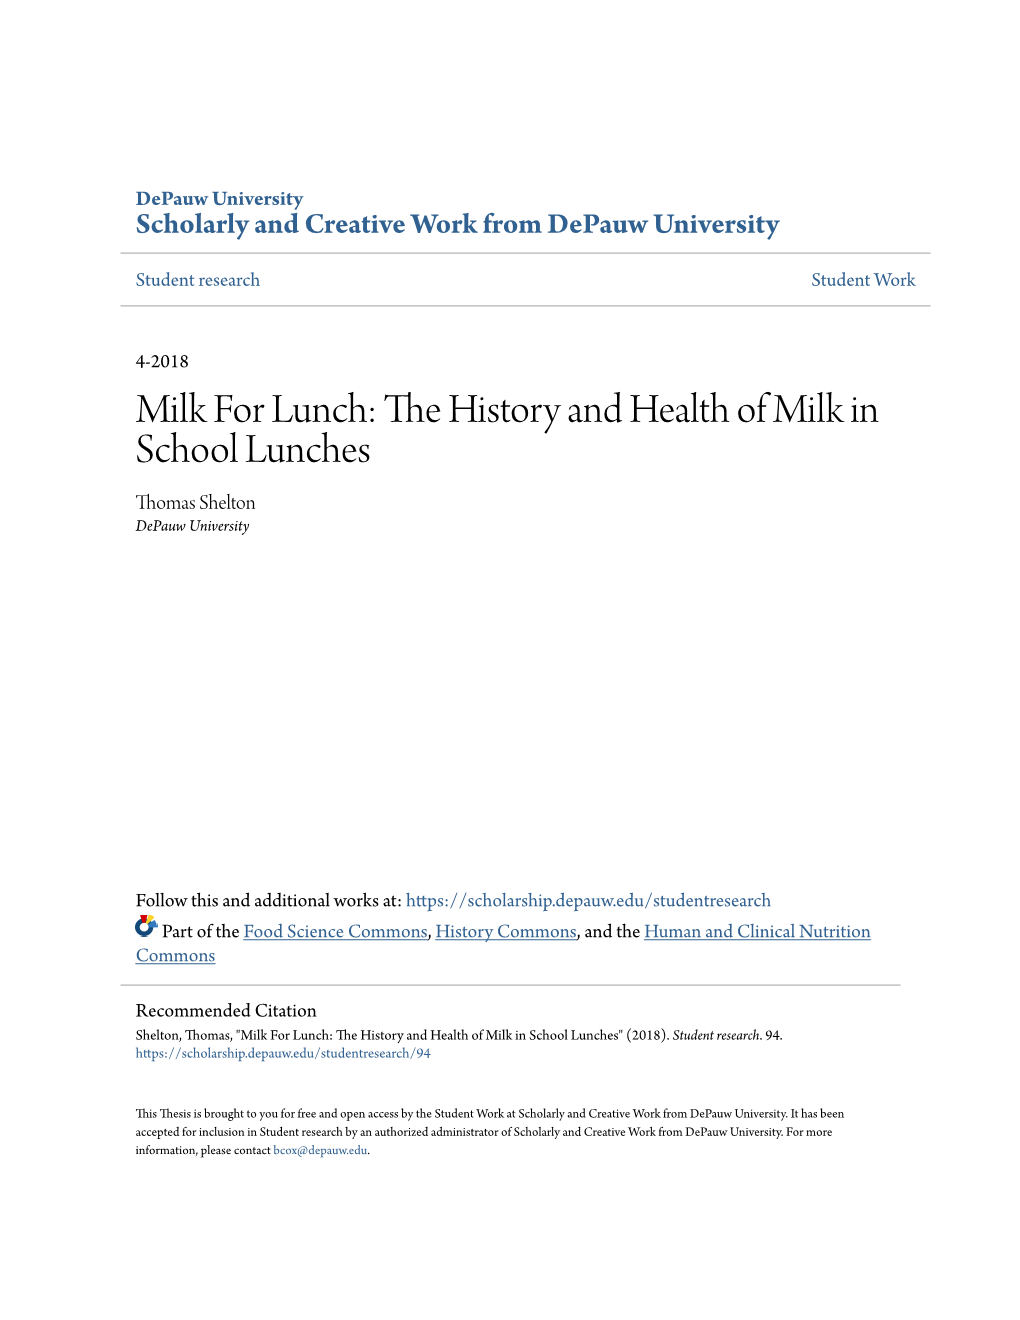 Milk for Lunch: the Ih Story and Health of Milk in School Lunches Thomas Shelton Depauw University